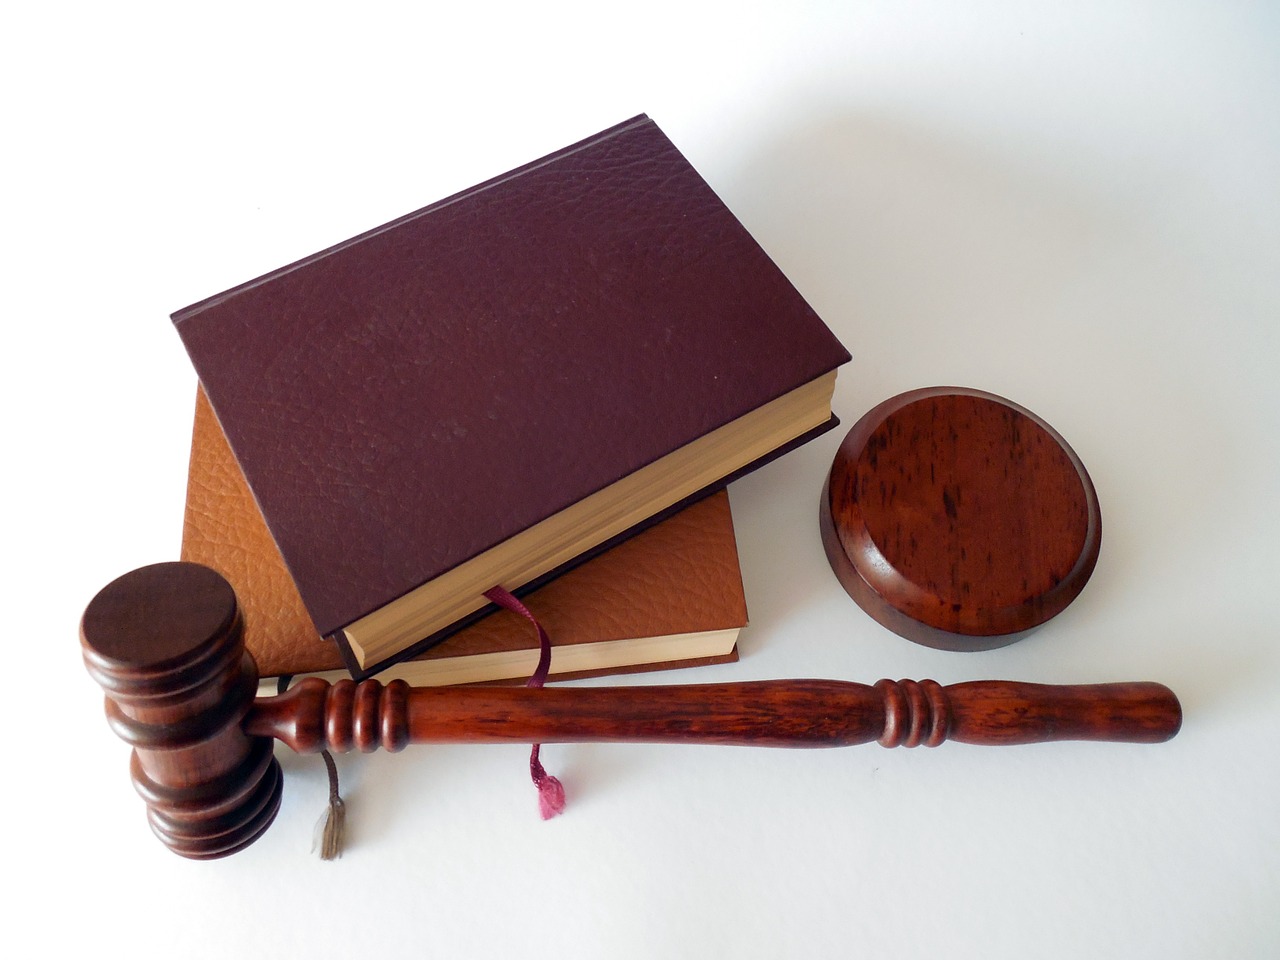 5 Reasons You Need an Employment Lawyer